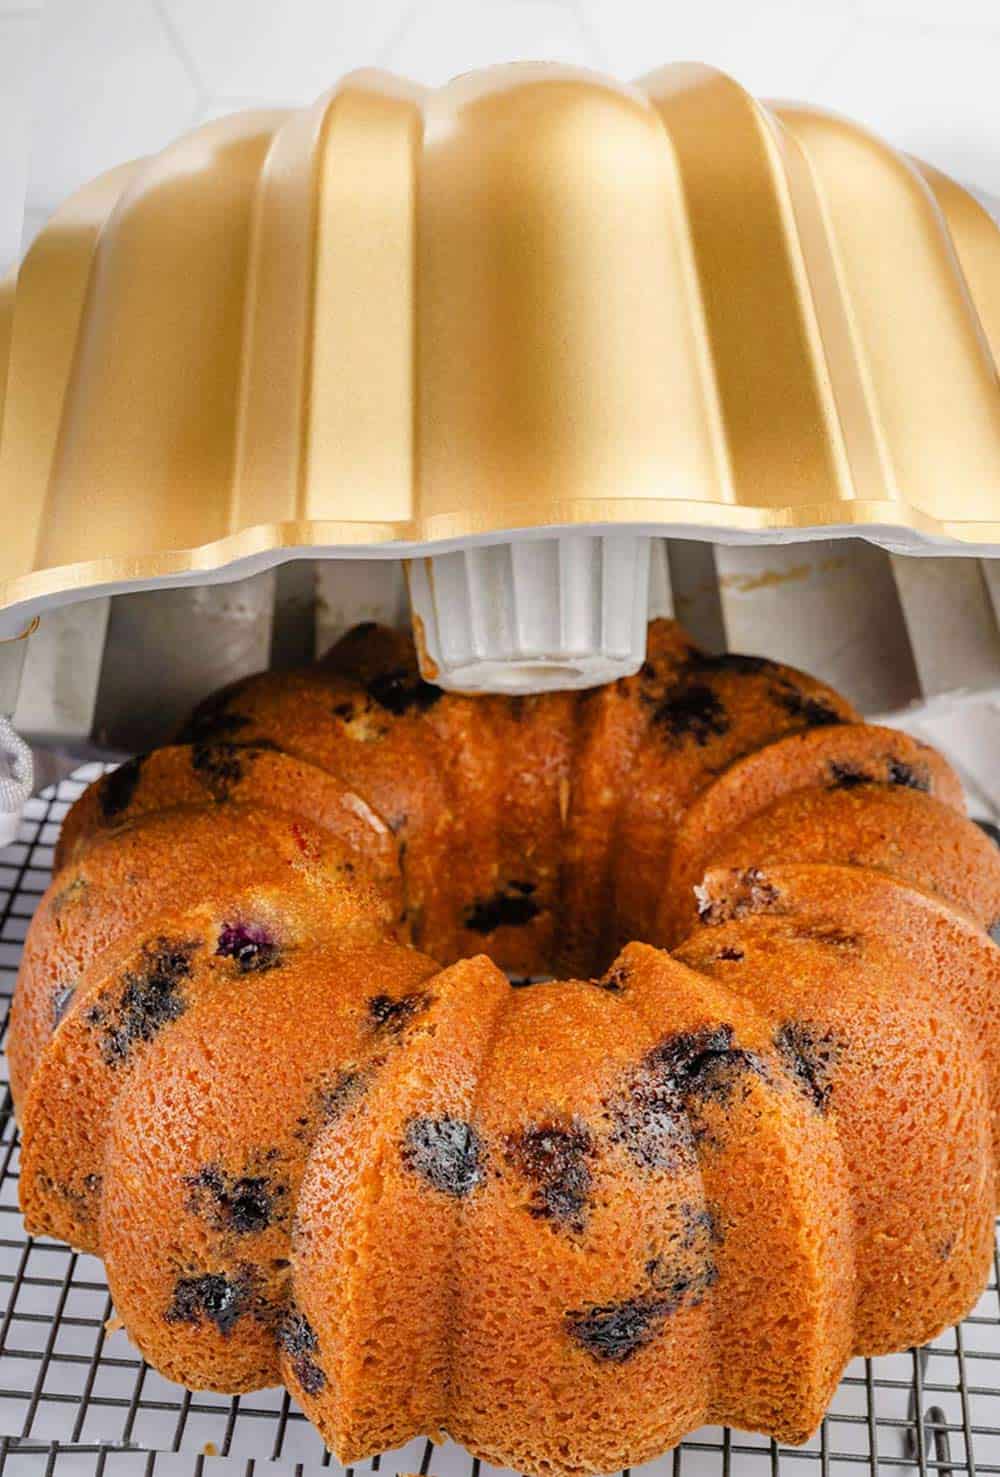 Flipping the bundt cake upside down onto a wire rack to cool, allowing gravity to help release it from the pan.